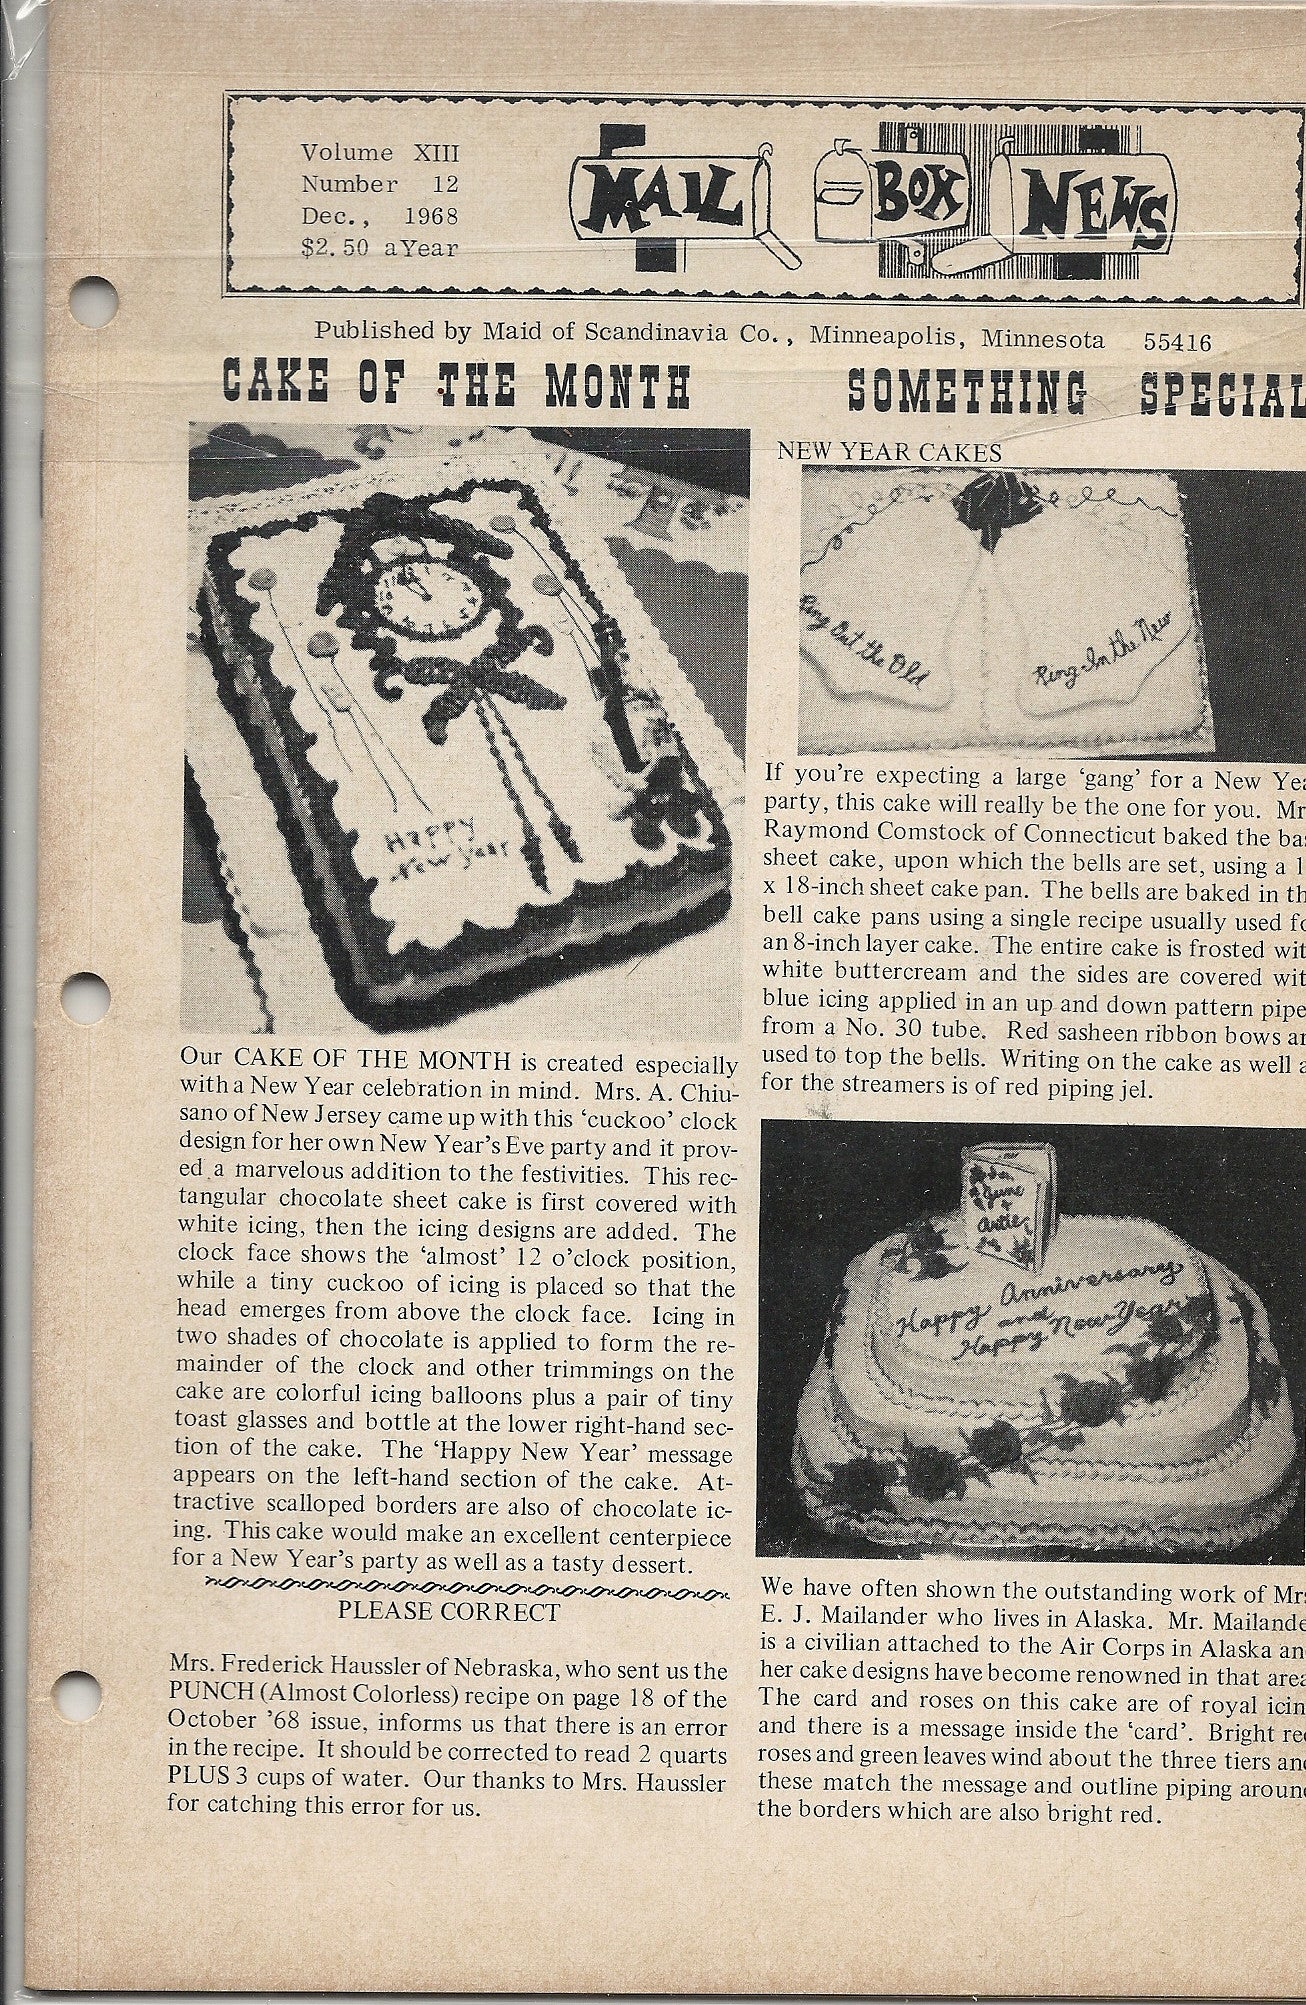 12 00 1968 Mail Box News Cake of the Month